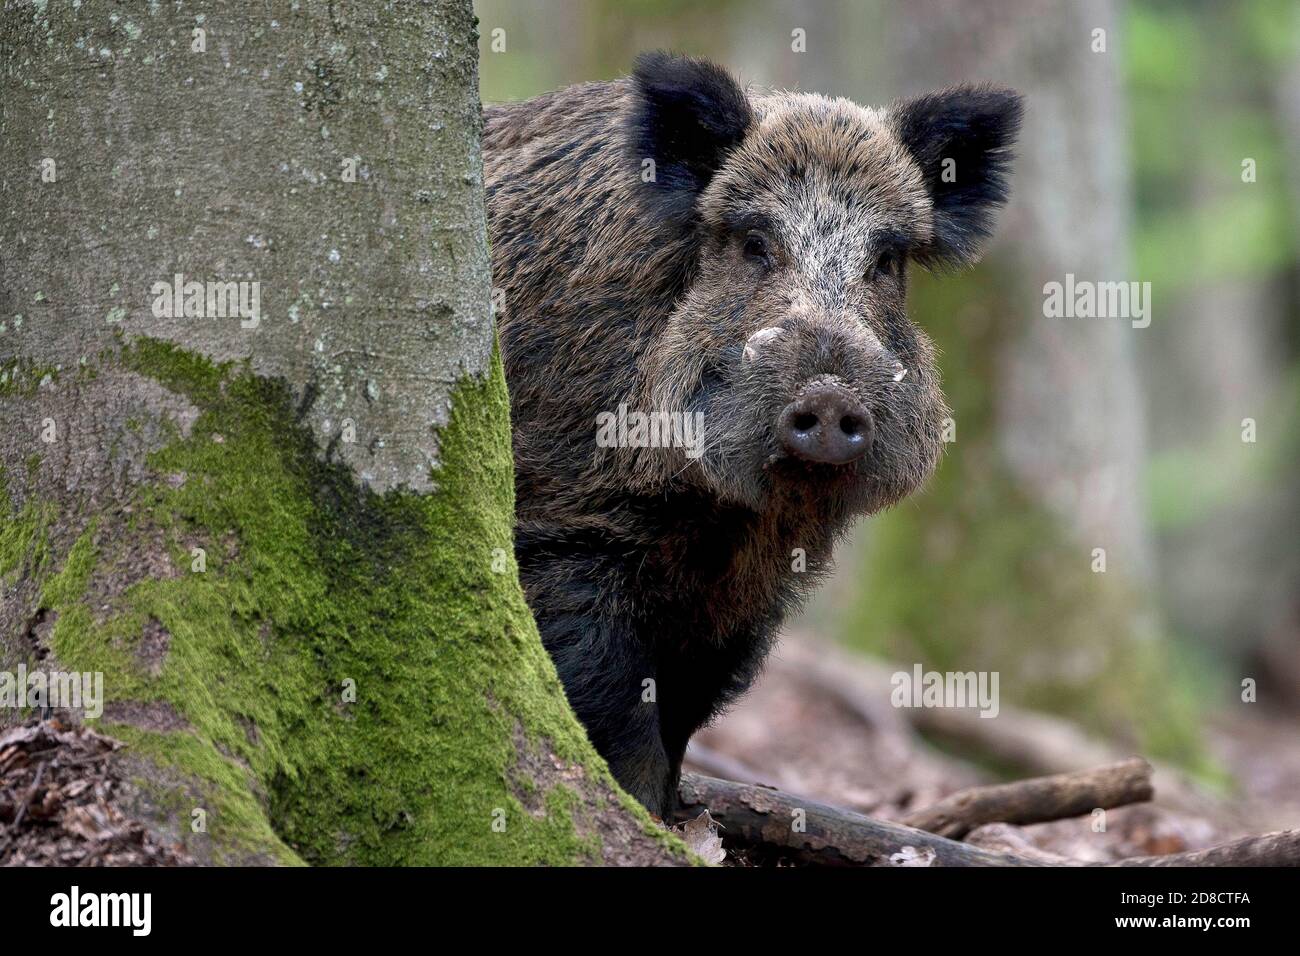 wild boar, pig, wild boar (Sus scrofa), wild sow peering behind a tree, front view, Germany, Black Forest Stock Photo